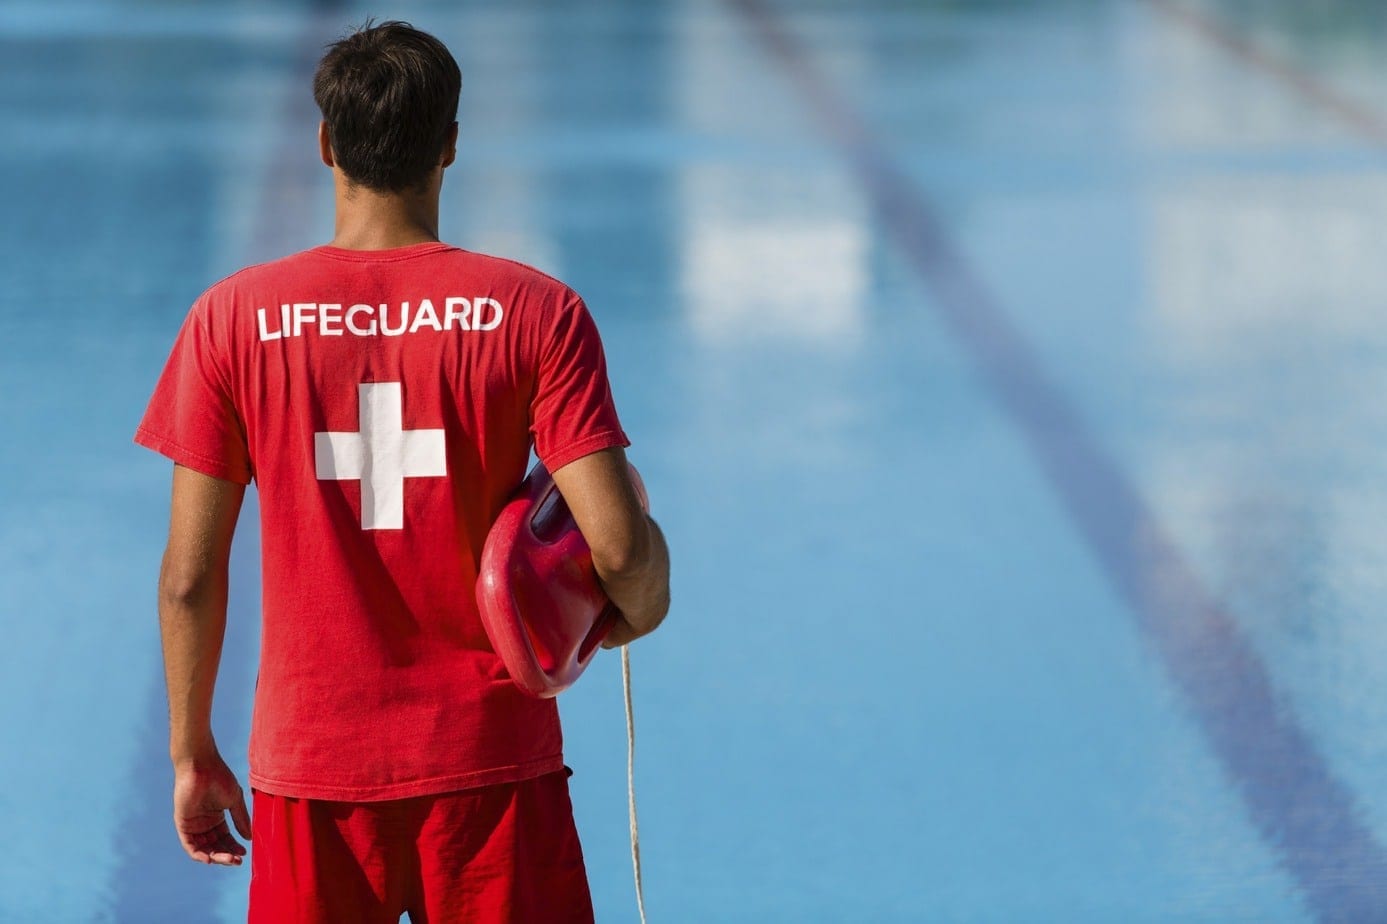 Lifeguard Training Ages 15+ - LOURDES HEALTH & FITNESS